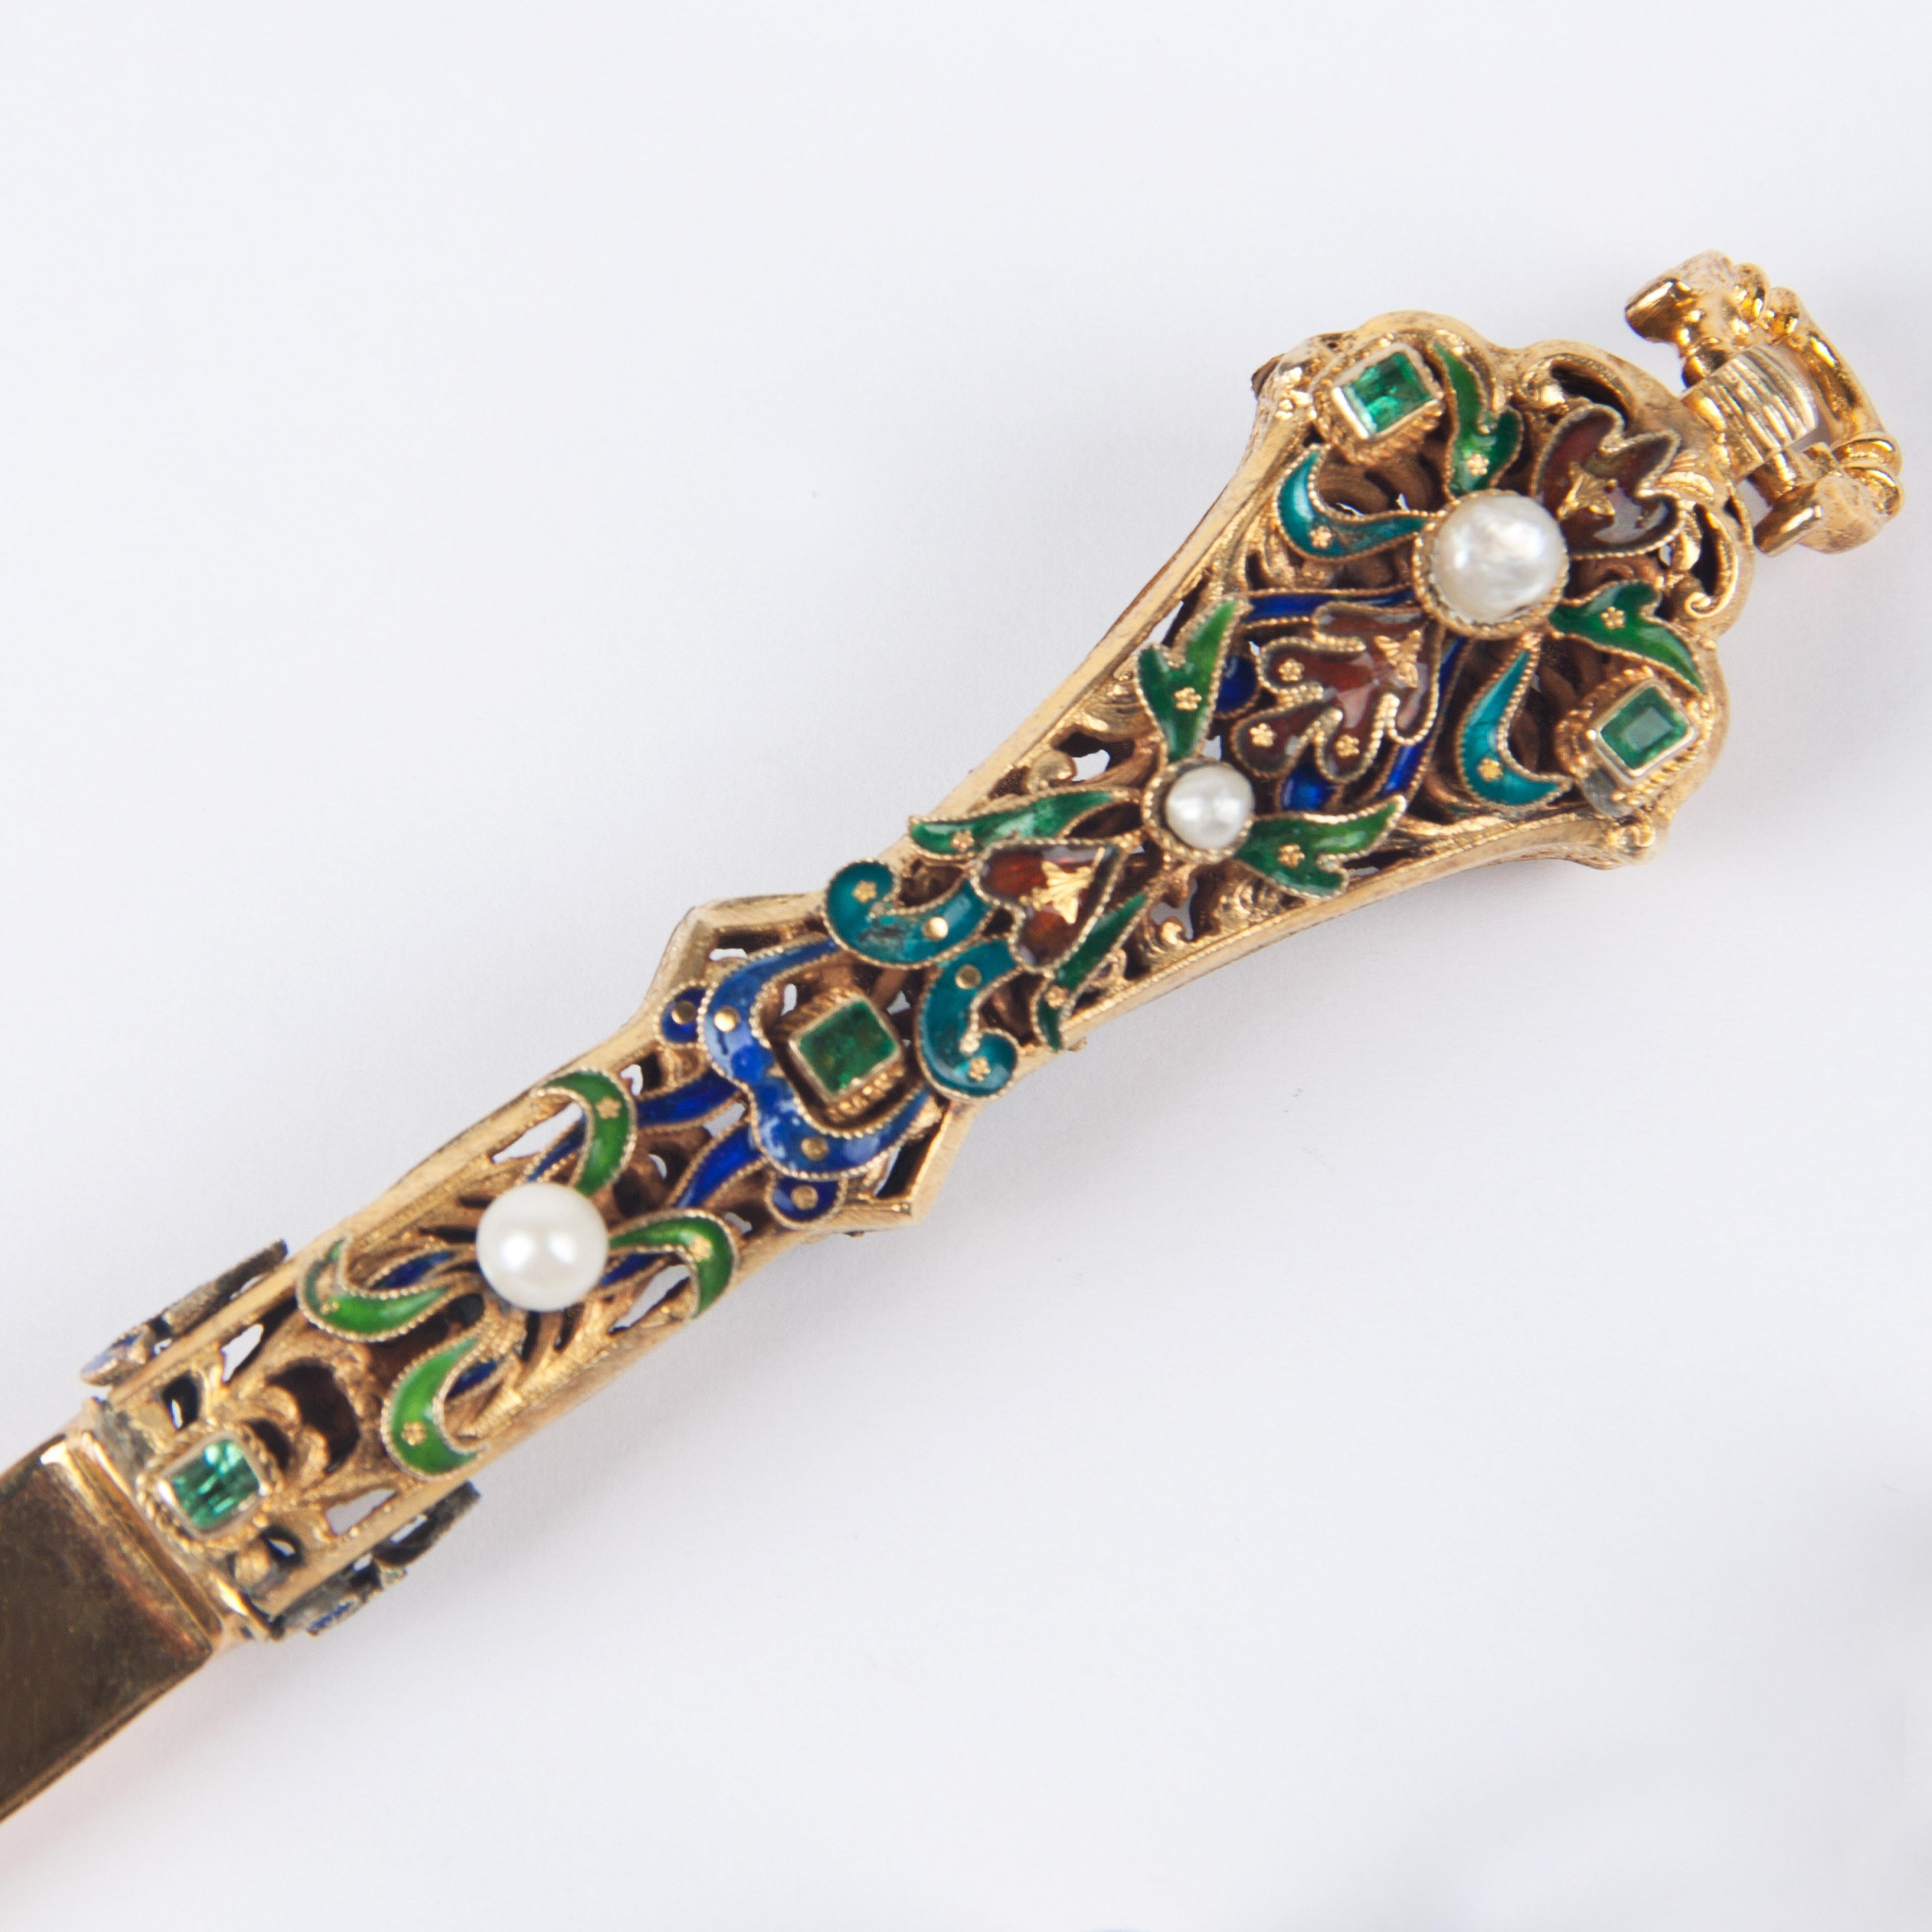 18 carat golden paper knife with paperclips.
Enamel de limoges, pearls and sapphire, circa 1900.
French.